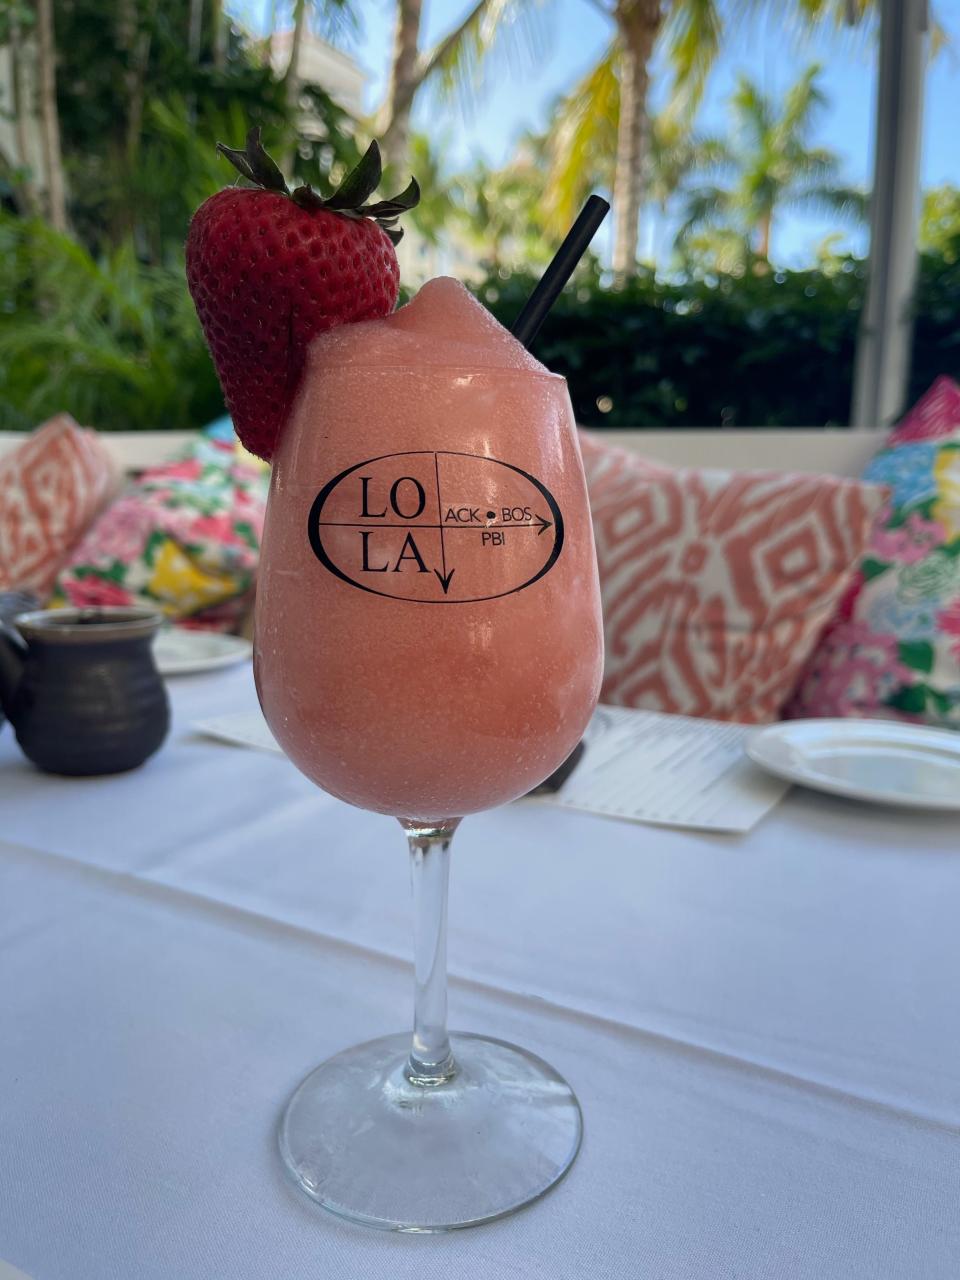 Celebrate Mother's Day with one of LoLa's signature cocktails like the Lola Frosé. This refreshing combination of fresh pureed strawberries, rosé and vodka is a wonderful hydrating compliment to the special day.